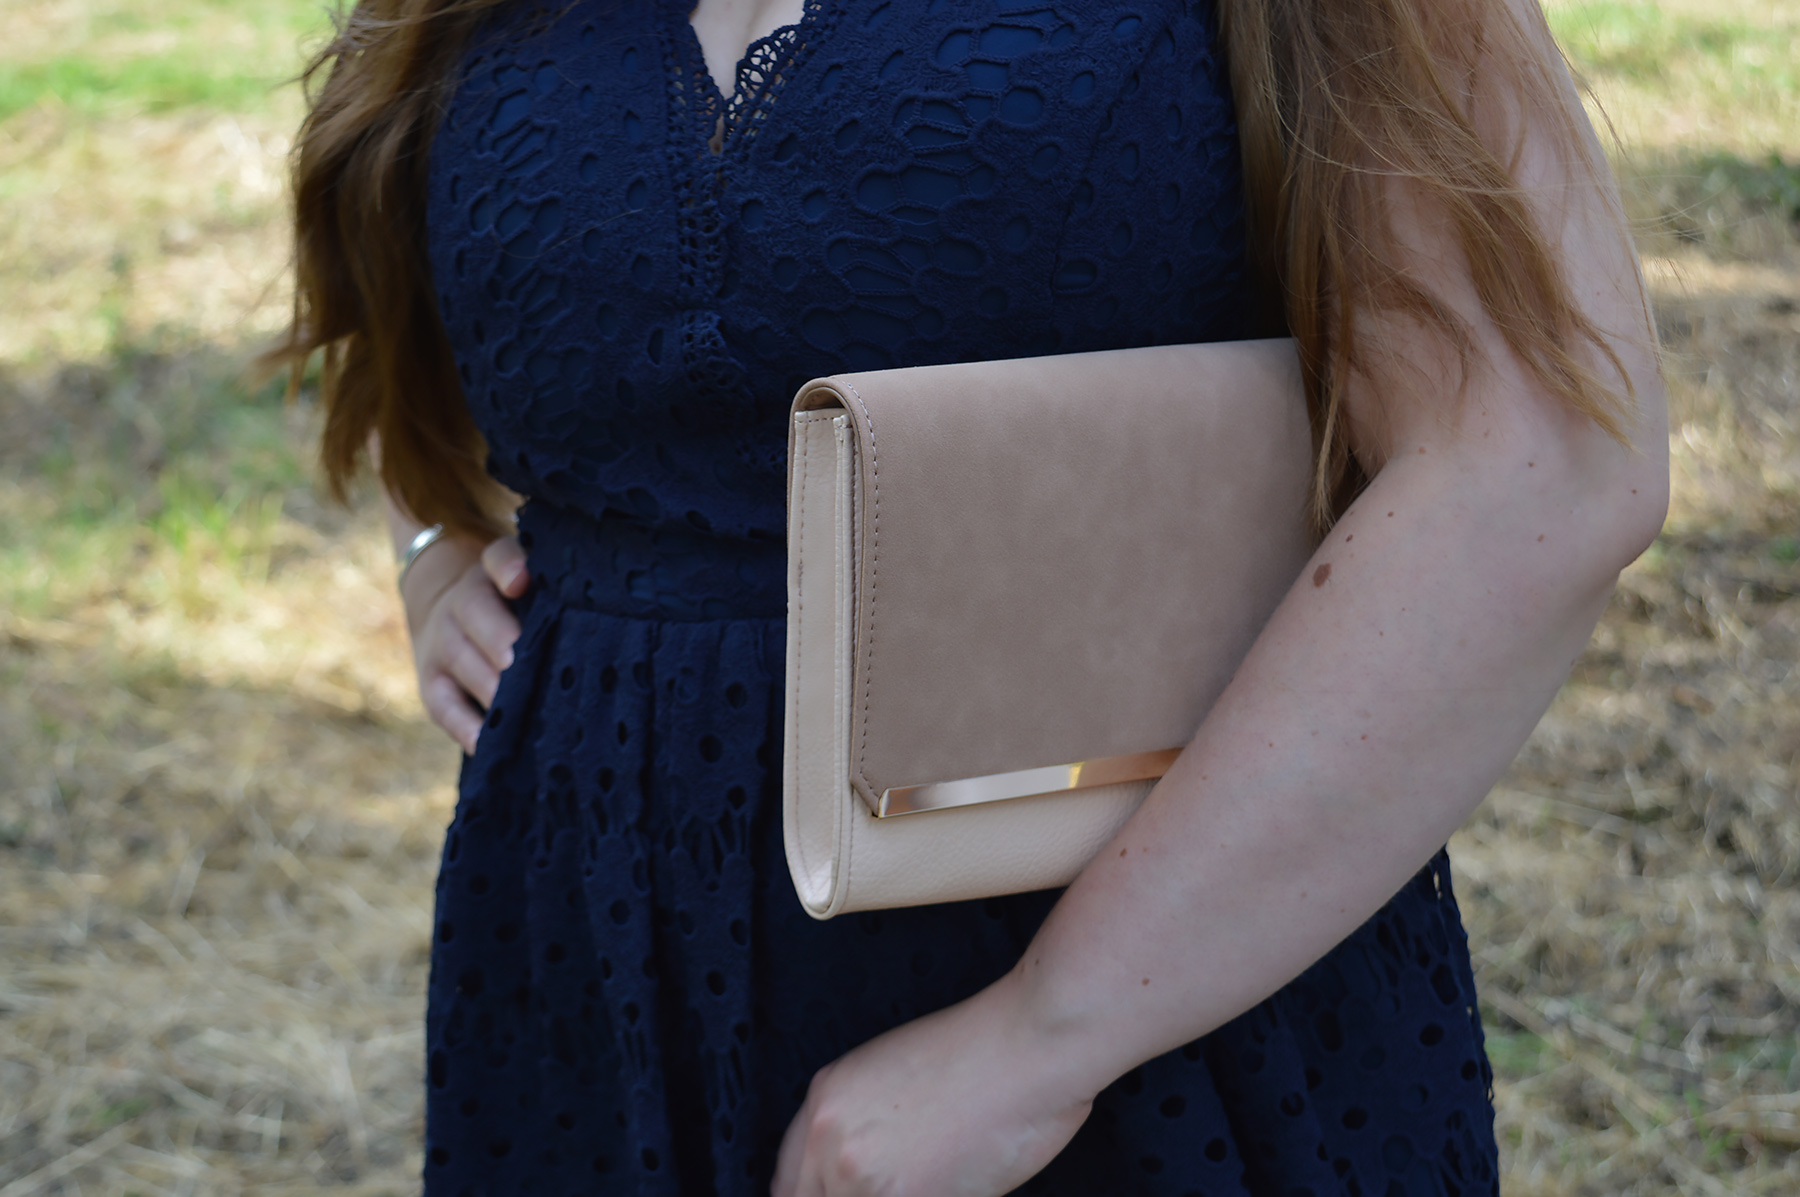 Laura Ashley Clutch and lace dress